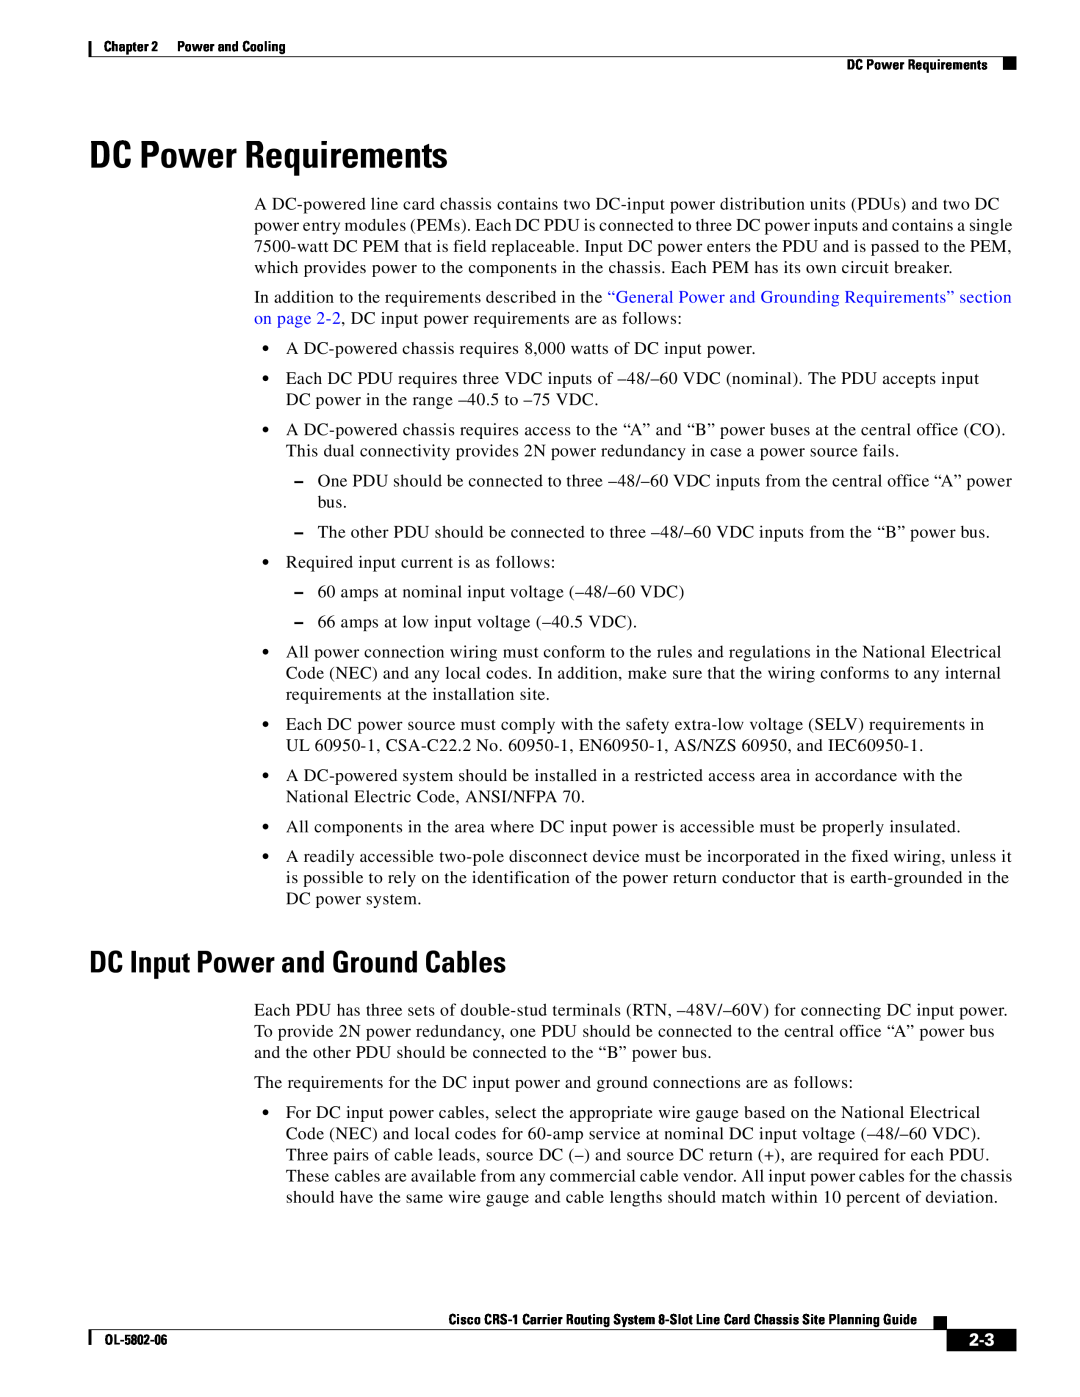 Cisco Systems CRS-1 manual DC Power Requirements, DC Input Power and Ground Cables 